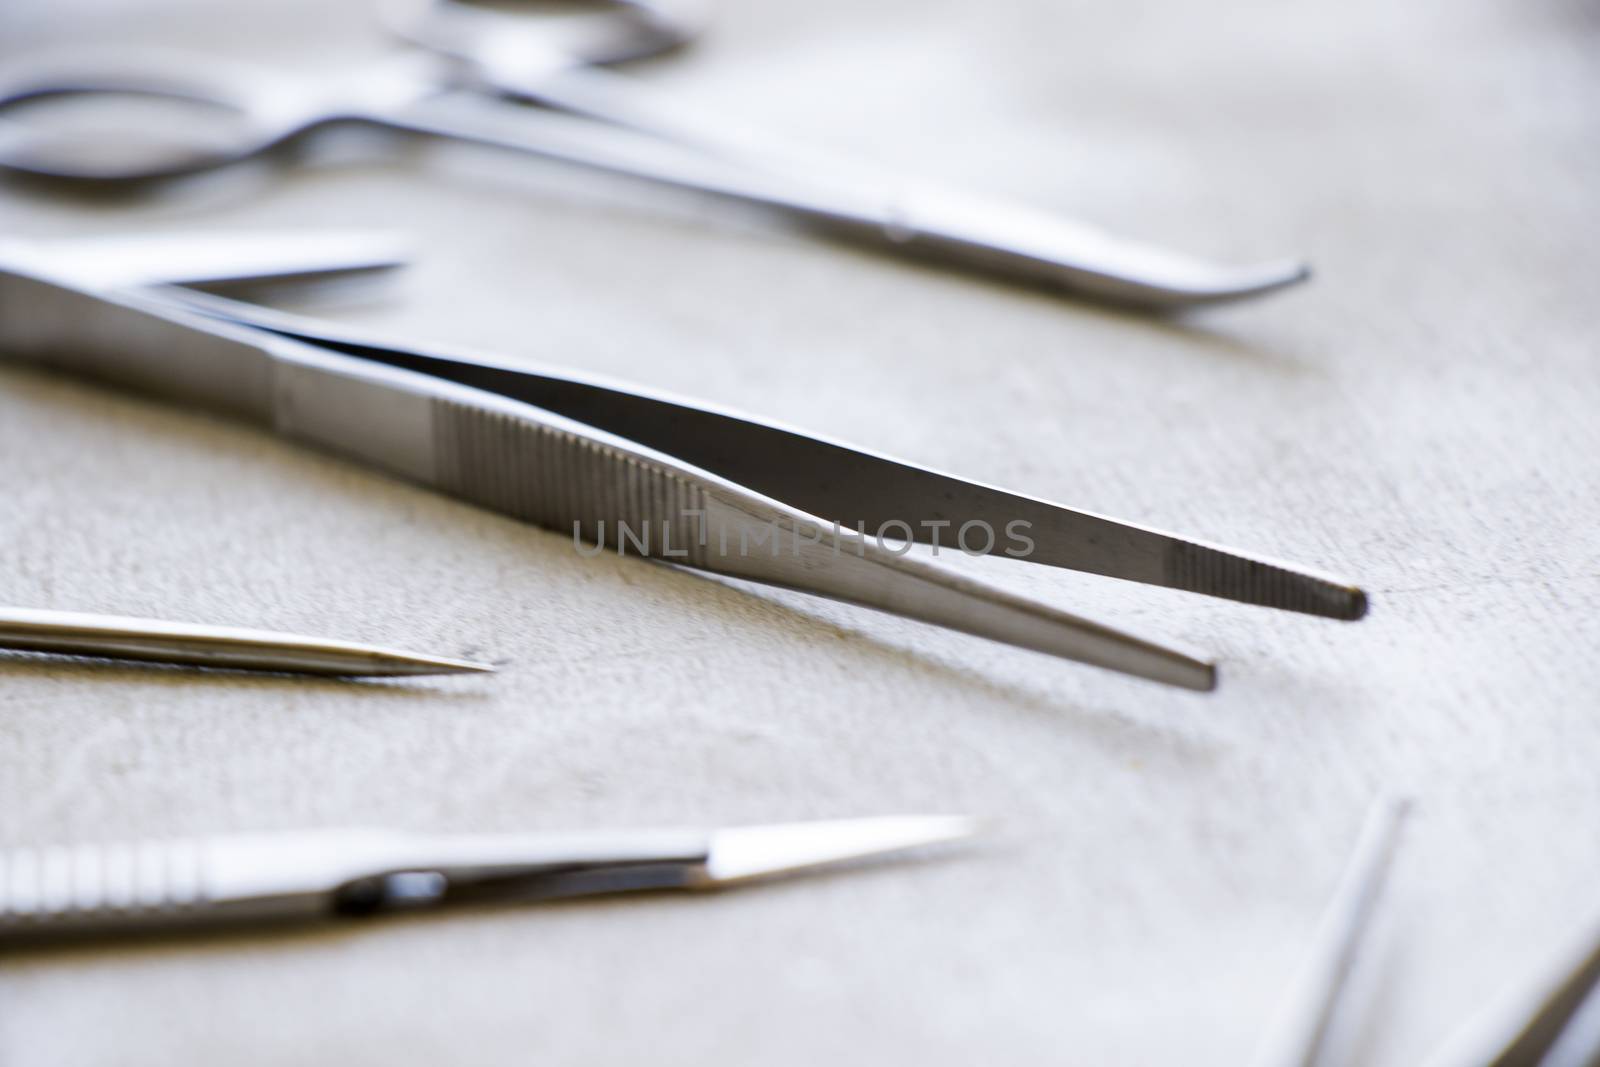 Dissection Kit - Stainless Steel Tools for Medical Students of Anatomy, Biology, Veterinary, Marine Biology